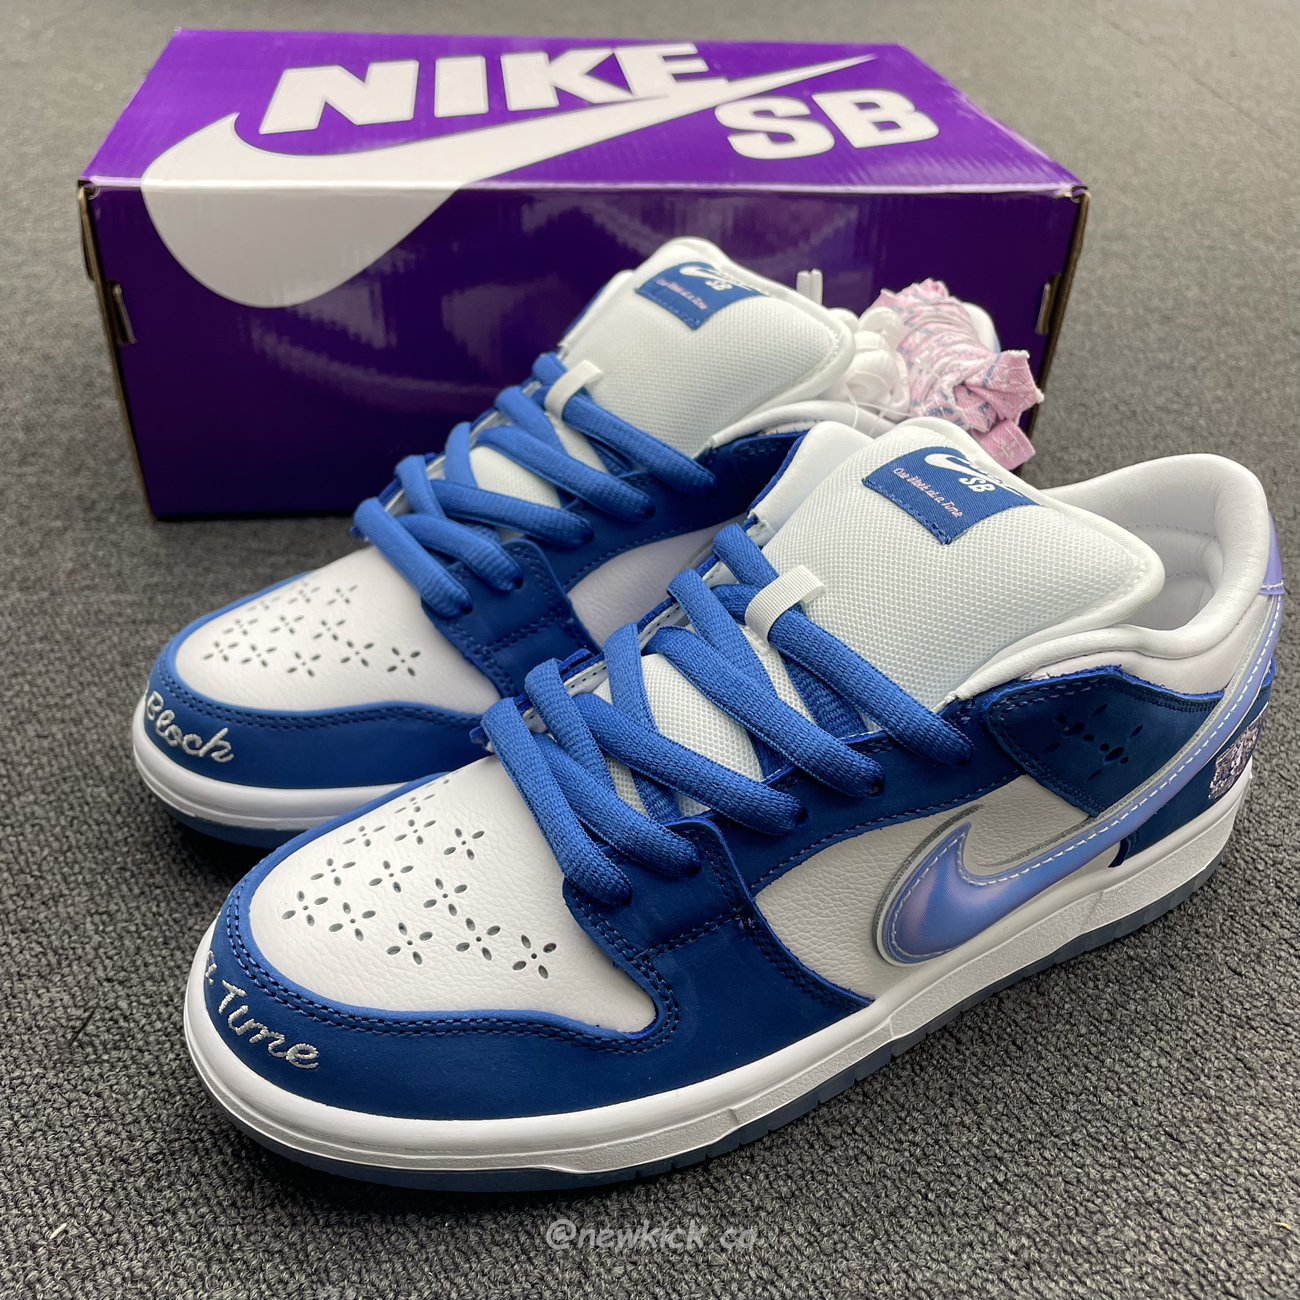 Nike Sb Dunk Low Born X Raised One Block At A Time Fn7819 400 (17) - newkick.org